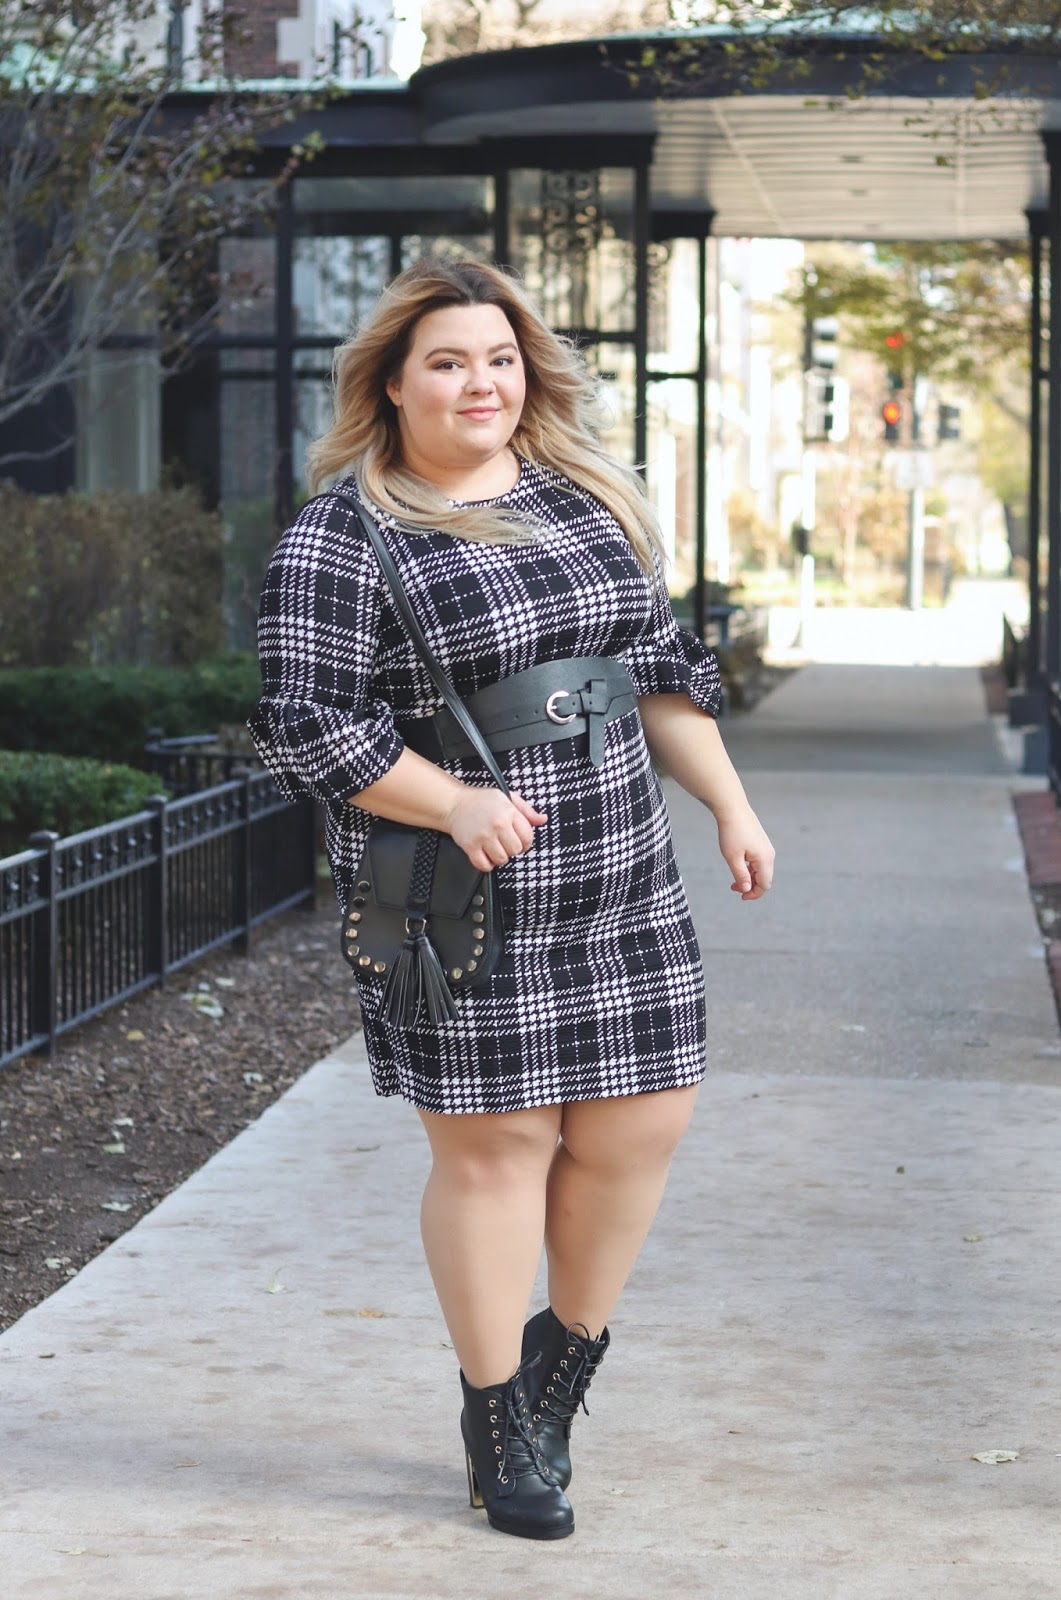 plus size fashion blogger, chicago blogger, chicago fashion blogger, natalie craig, natalie in the city, chicago plus size fashion blogger, fashion blogger, just my size, JMS, form fitting plus size clothing, affordable plus size clothing, plus size dresses, flattering plus size dresses, curves and confidence, fatshion